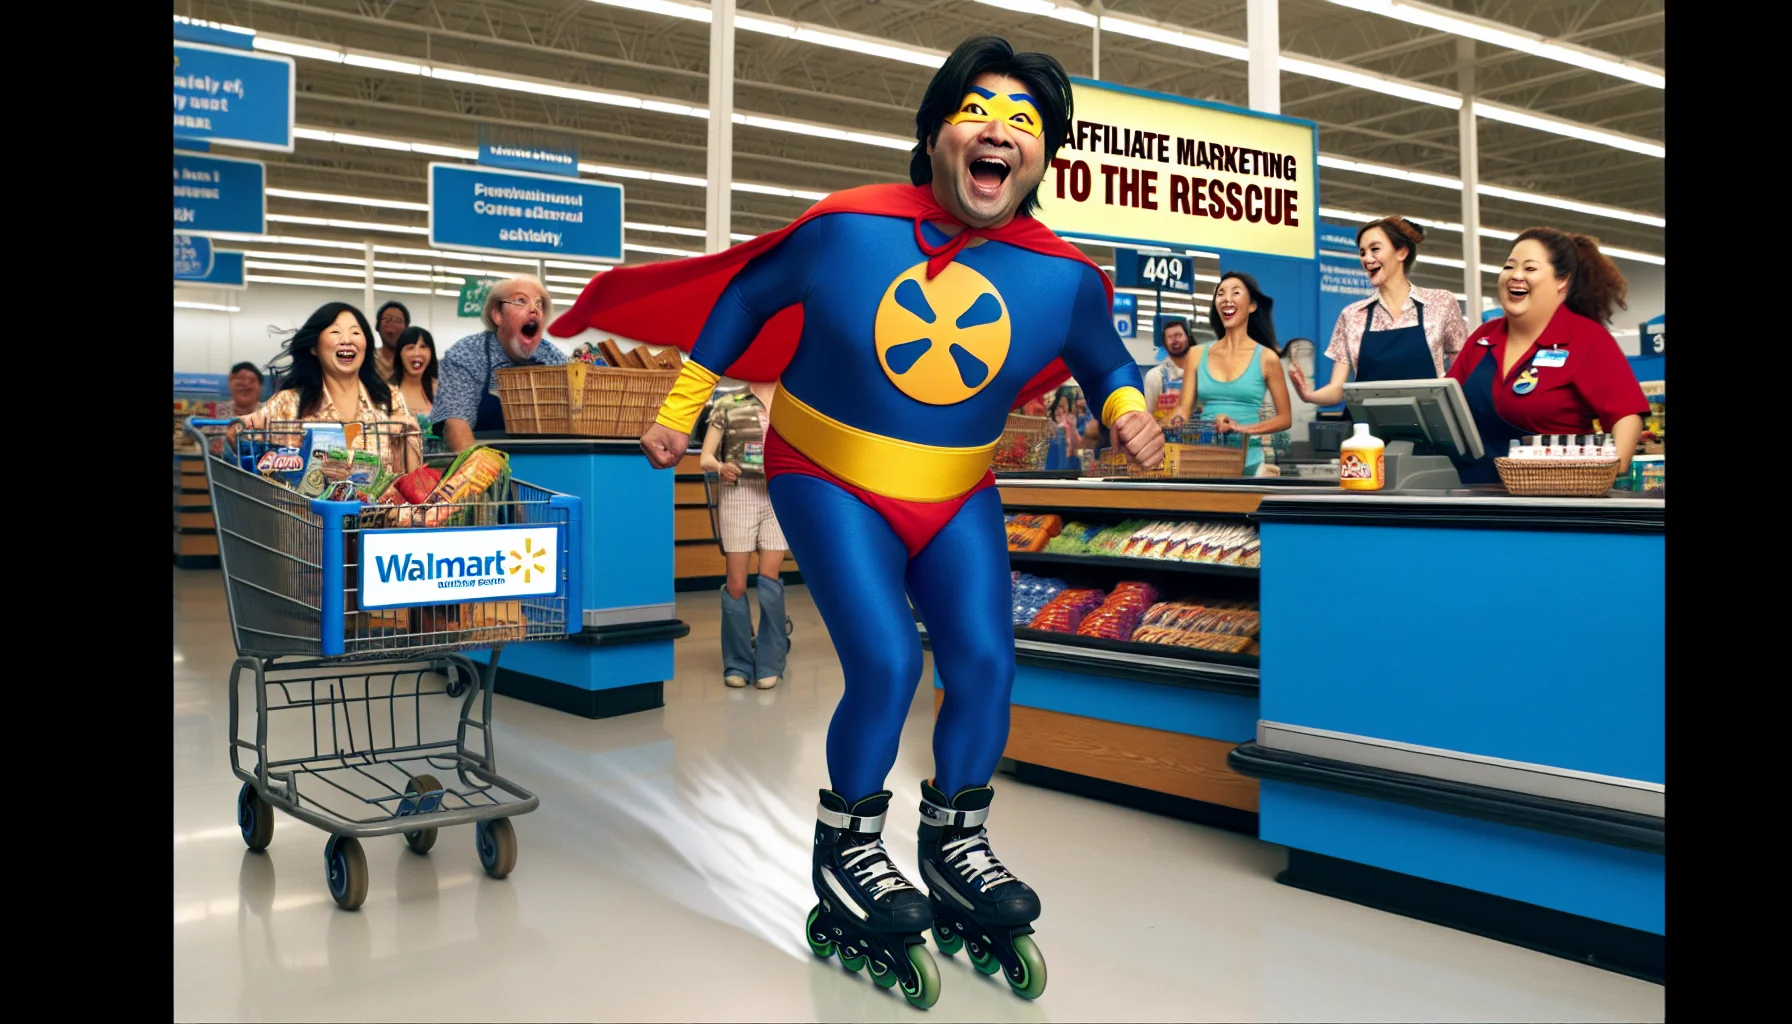 Direct your vision toward this comedic scene: A jovial South Asian man clad in a superhero costume, with the Walmart logo emblazoned on his chest, speeding down the grocery aisle on rollerblades. His eyes twinkle with adventure as the wind rustles his cape. He holds aloft a sign that reads 'Affiliate Marketing to the Rescue'. In the background, shoppers - a group of diverse people of various genders and descents - react with amused surprise. Cashiers, an East Asian woman and a Middle Eastern man, chuckle behind their registers. The air buzzes with laughter and high spirits, capturing a hilariously exaggerated promotion of Walmart's affiliate marketing strategy.